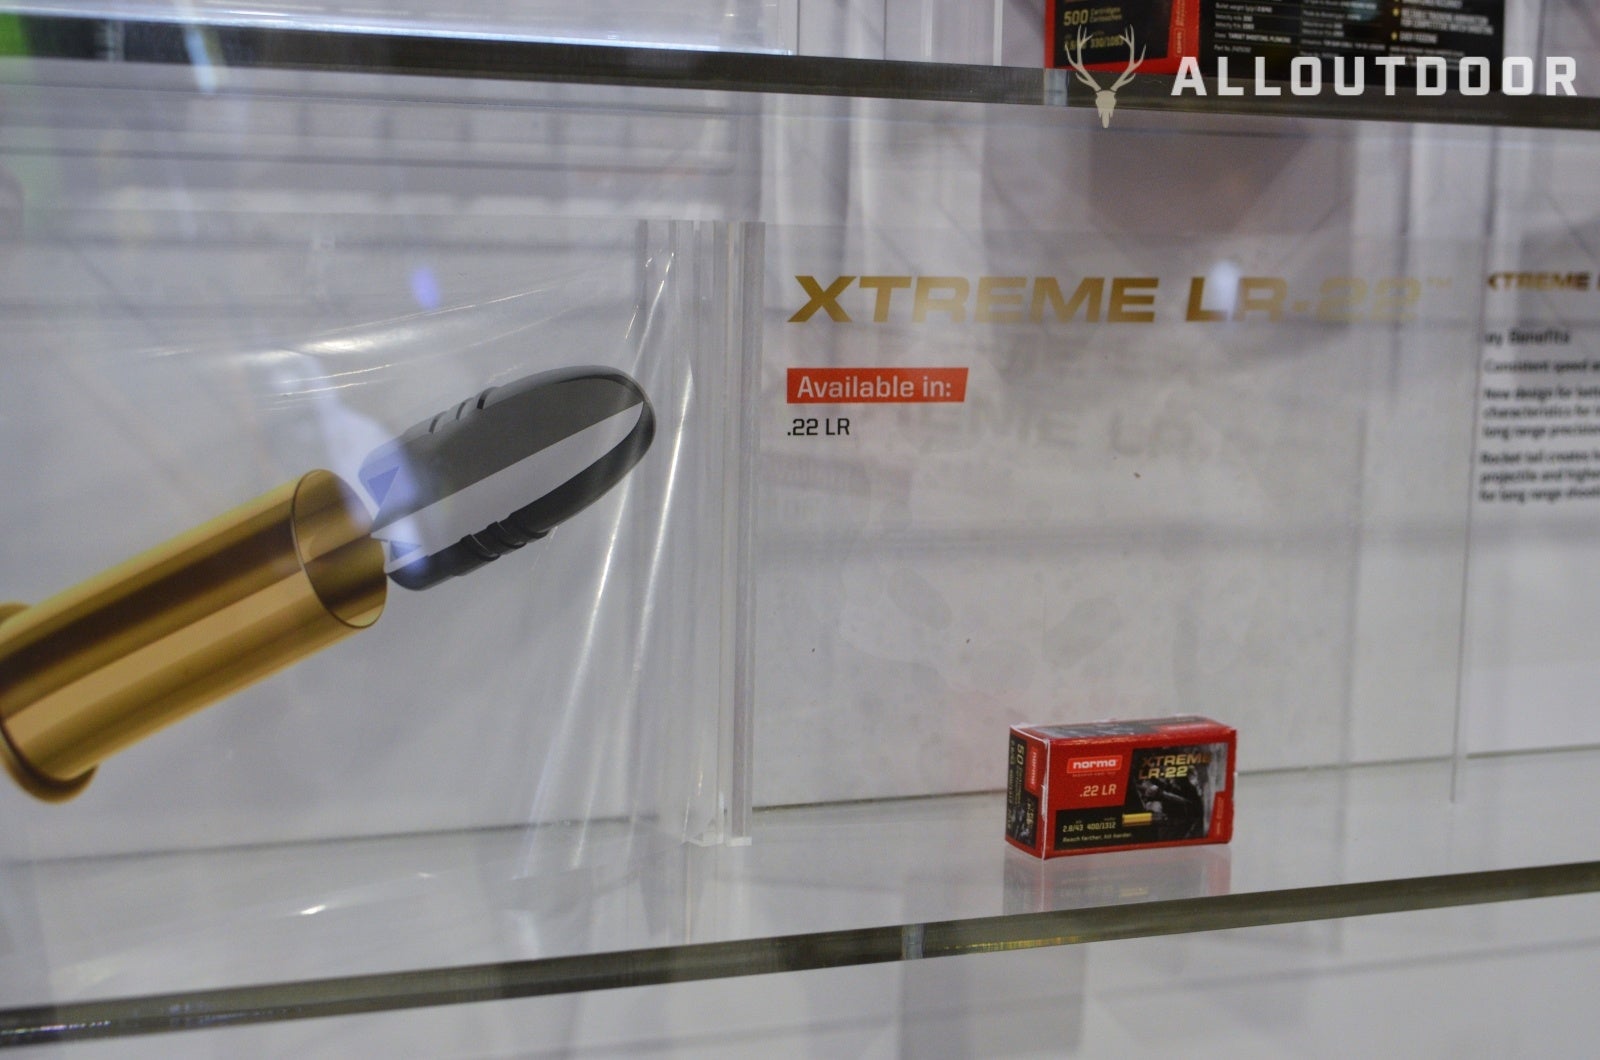 [SHOT 2023] NEW from Norma: New NXD Calibers & Xtreme LR-22